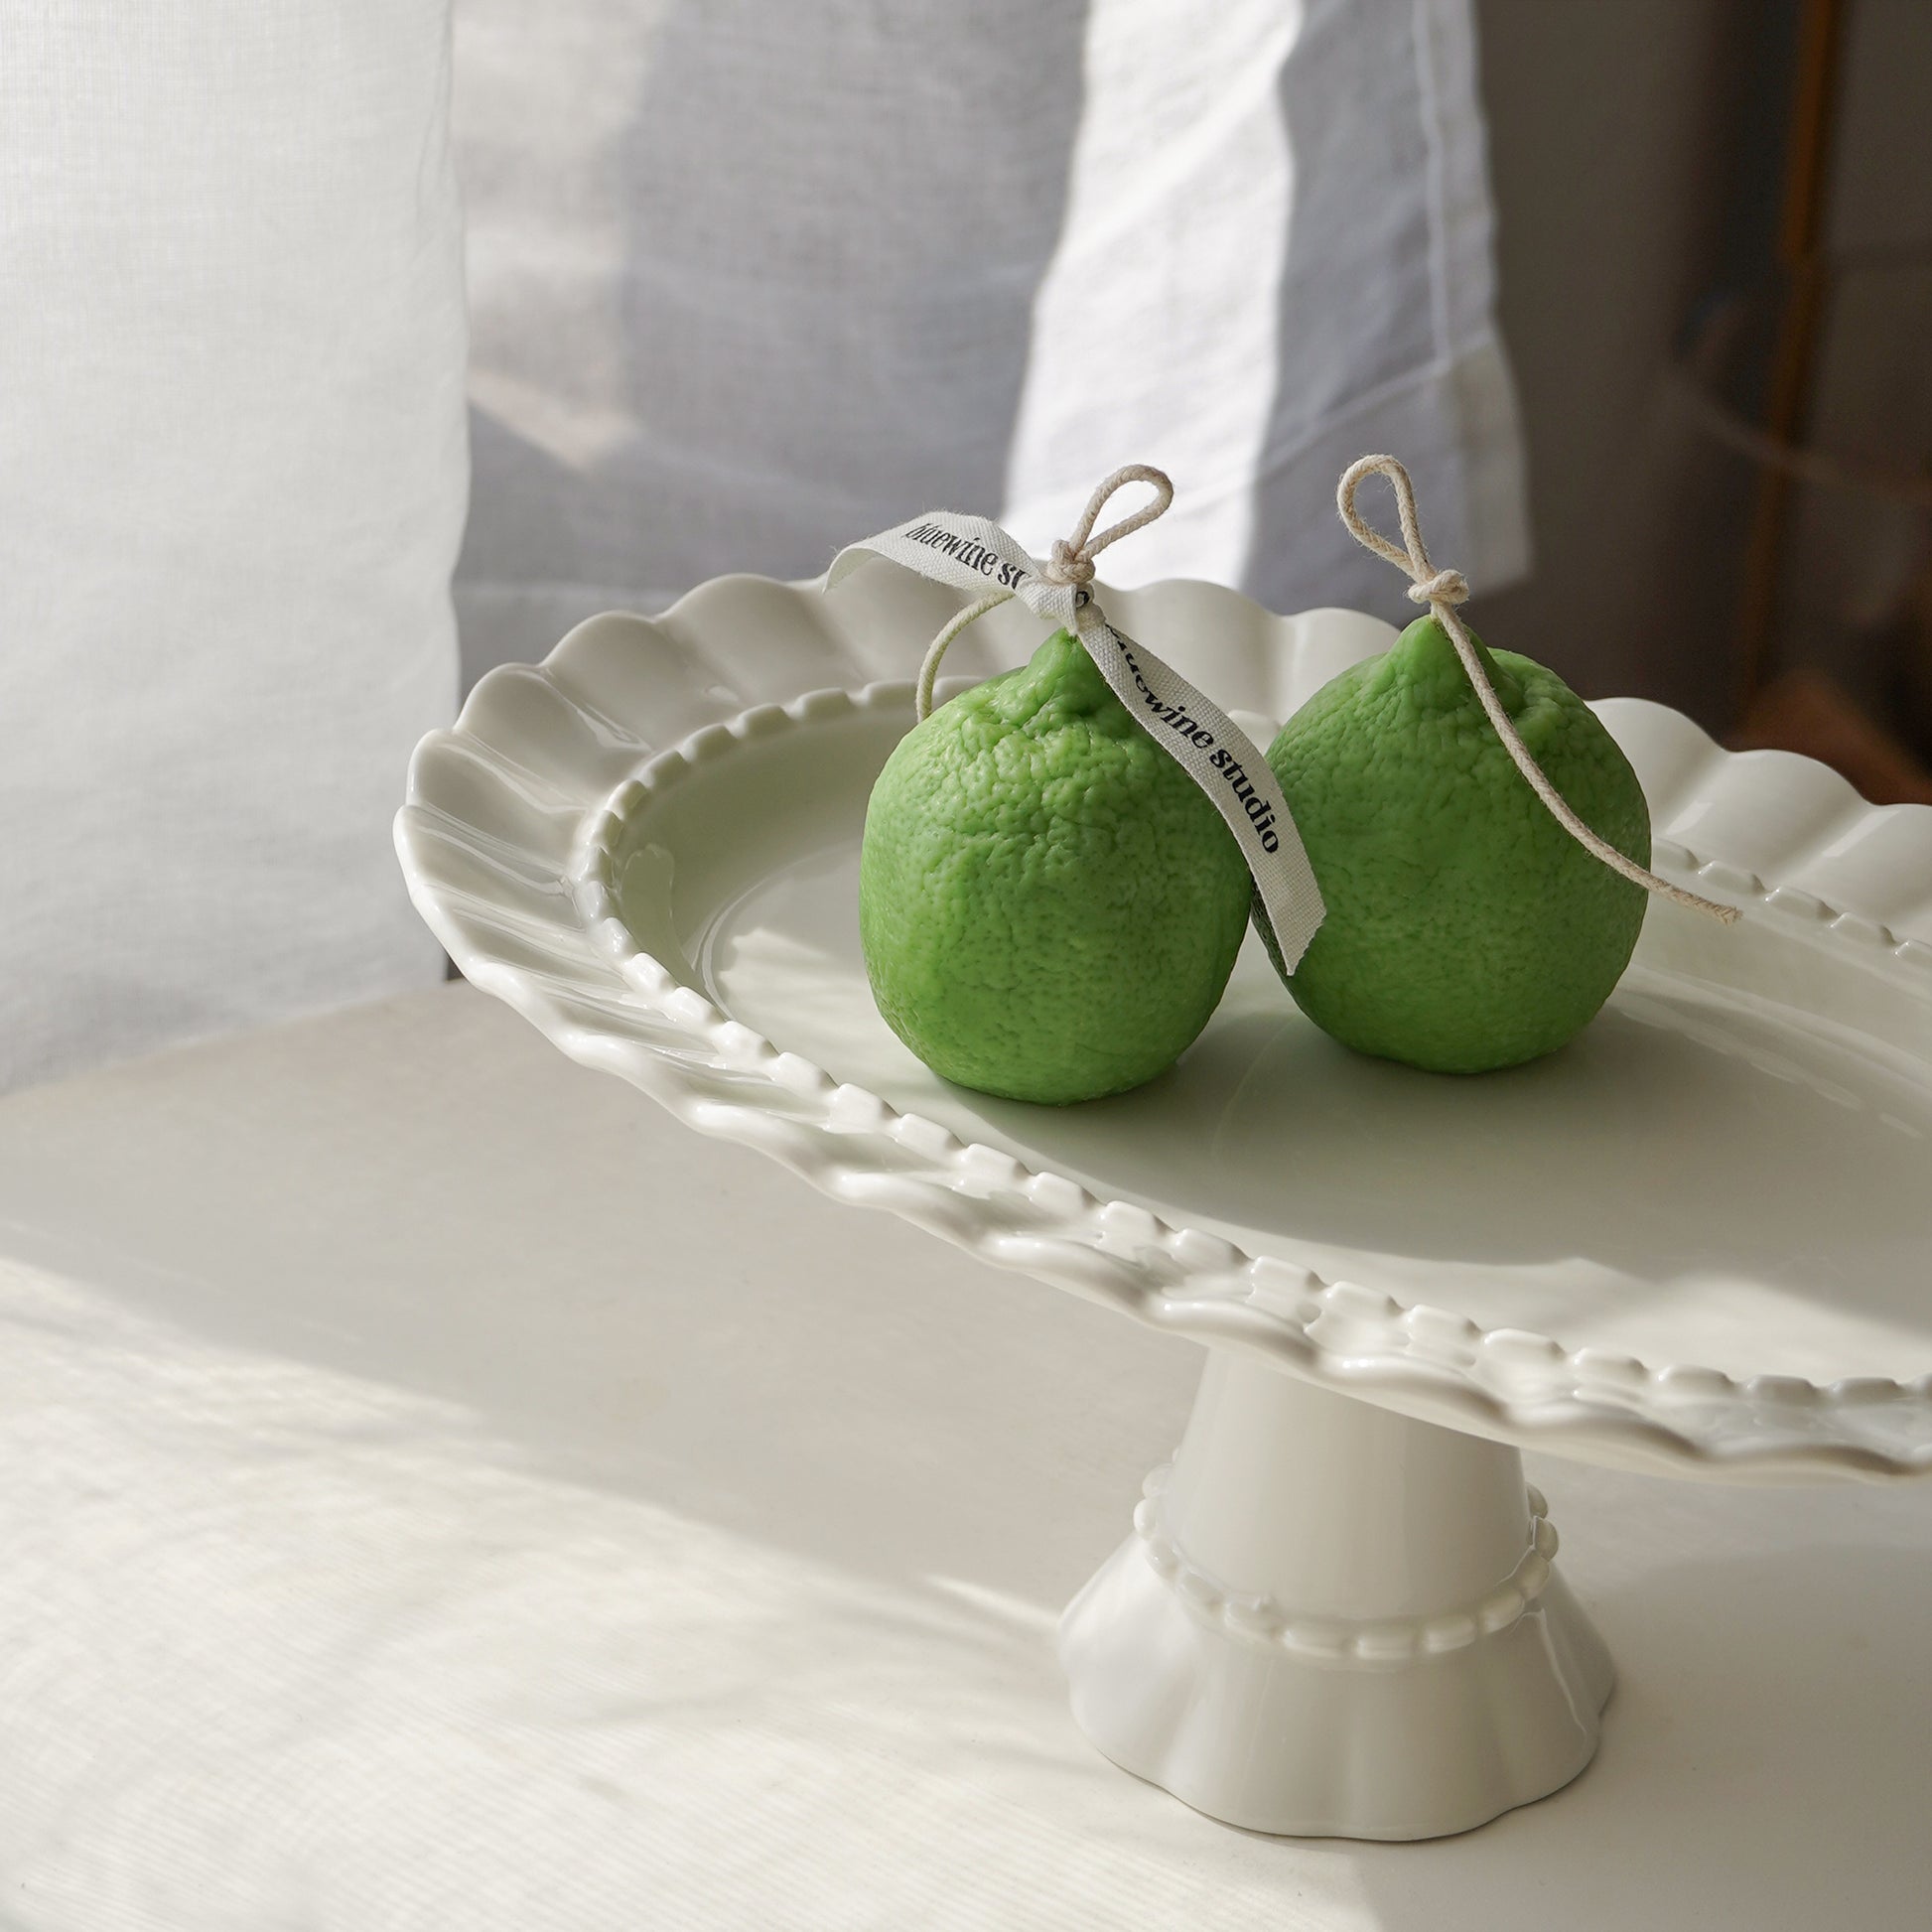 two lime-shaped candles placed on a white cake stand